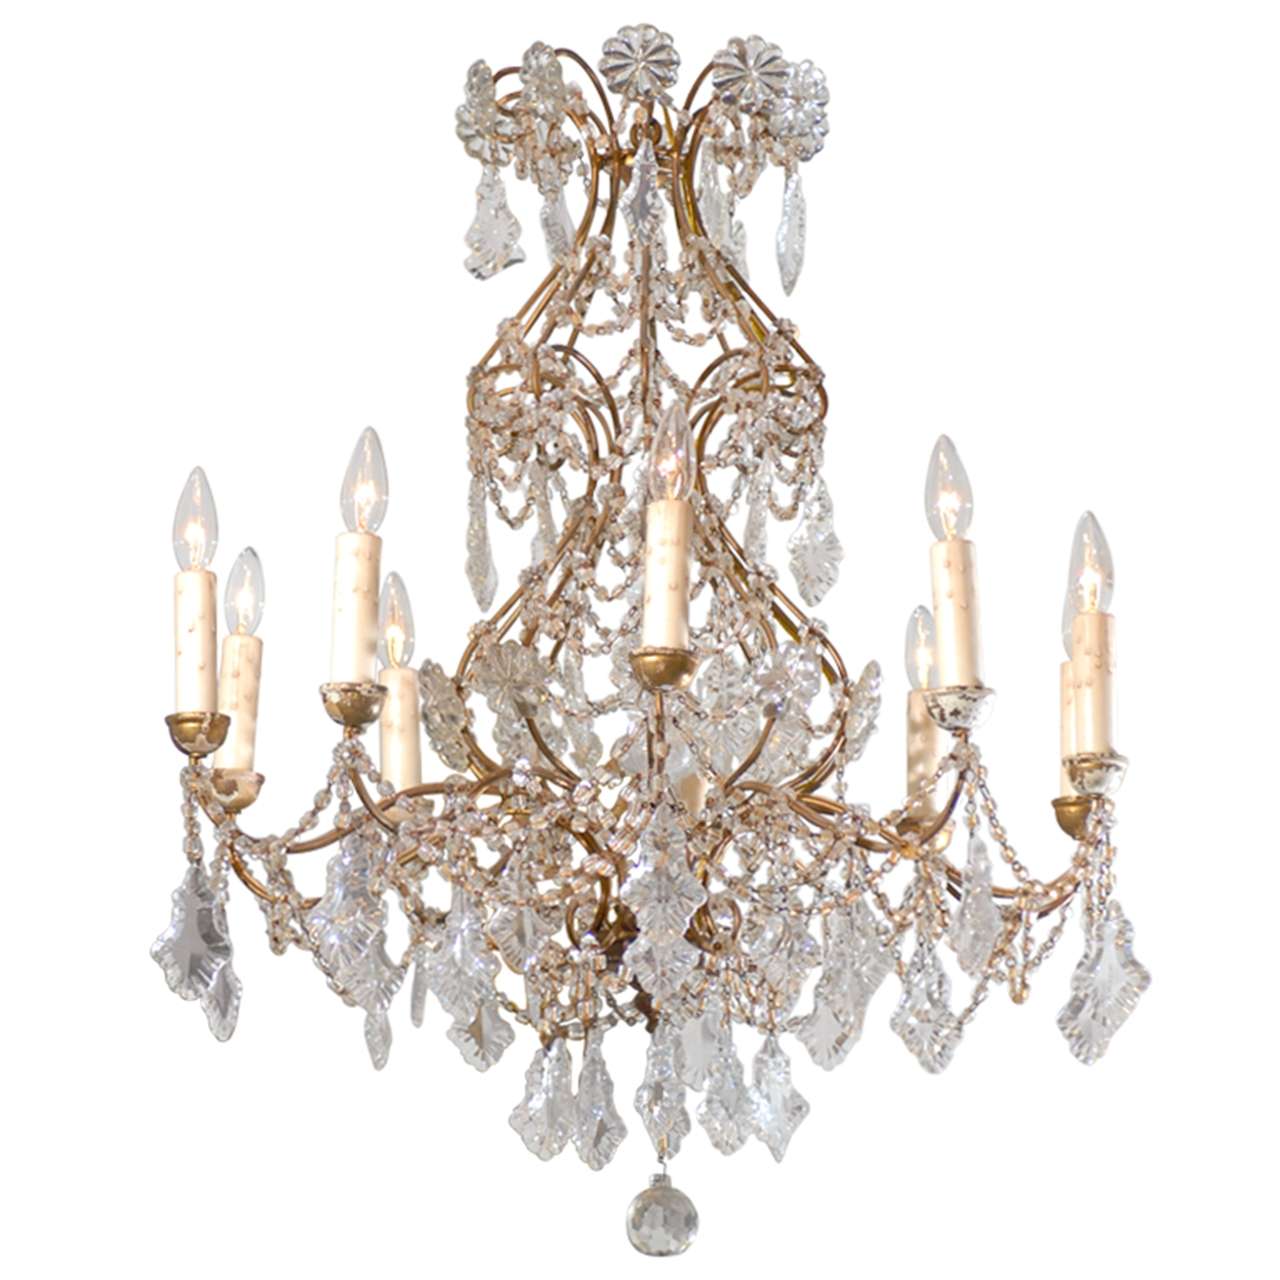 Italian 1850s Rococo Style Ten-Light Crystal Chandelier with Gilt Metal Armature For Sale